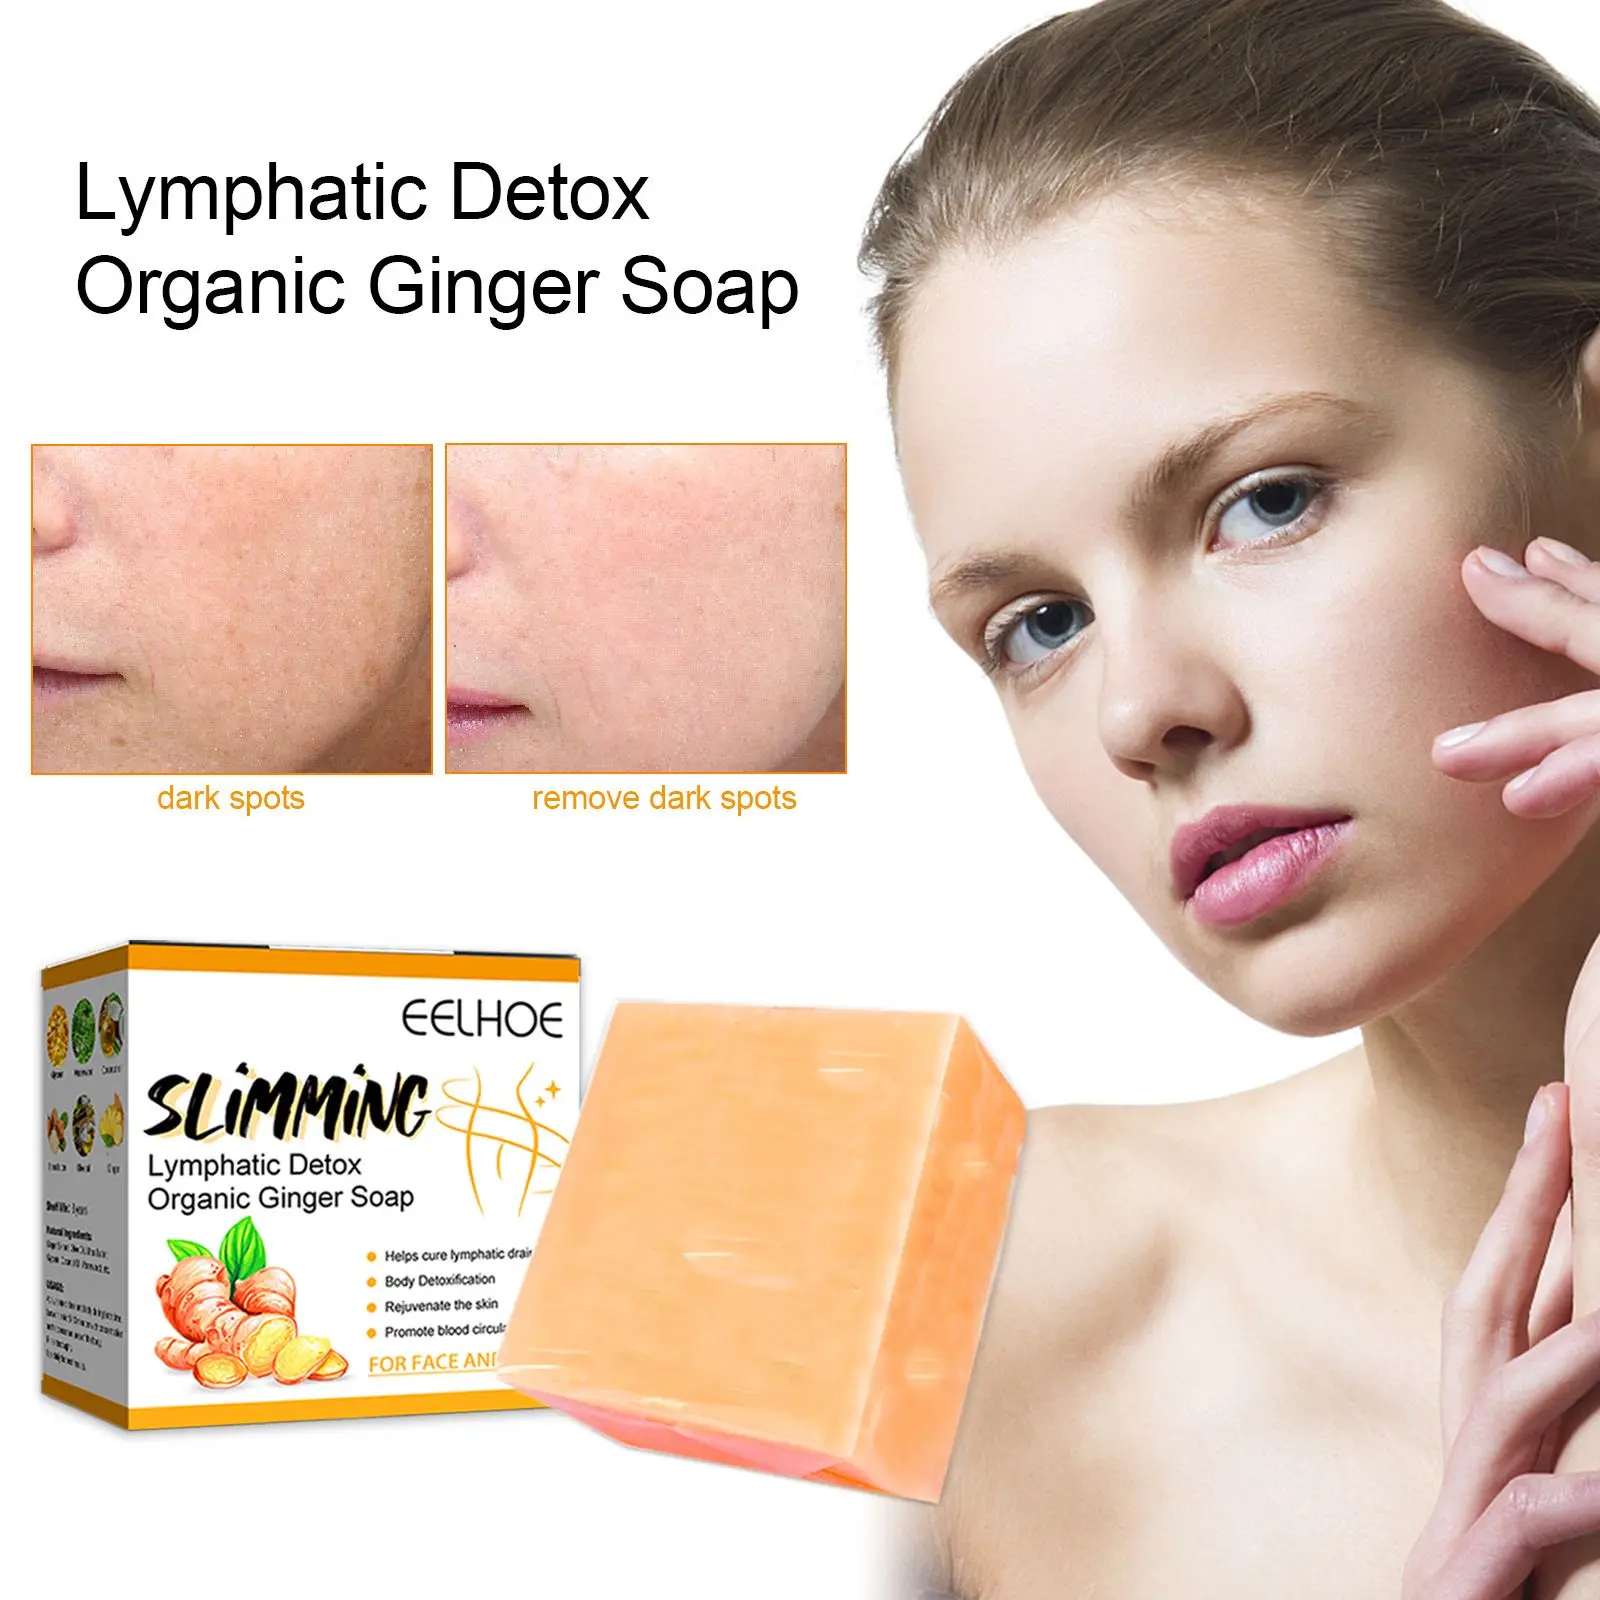 

Lymphatic Detox Organic Ginger Soaps Turmeric Soap Beauty & Health for Neck Armpit Anti Swelling Bathroom Skin Care Accessories